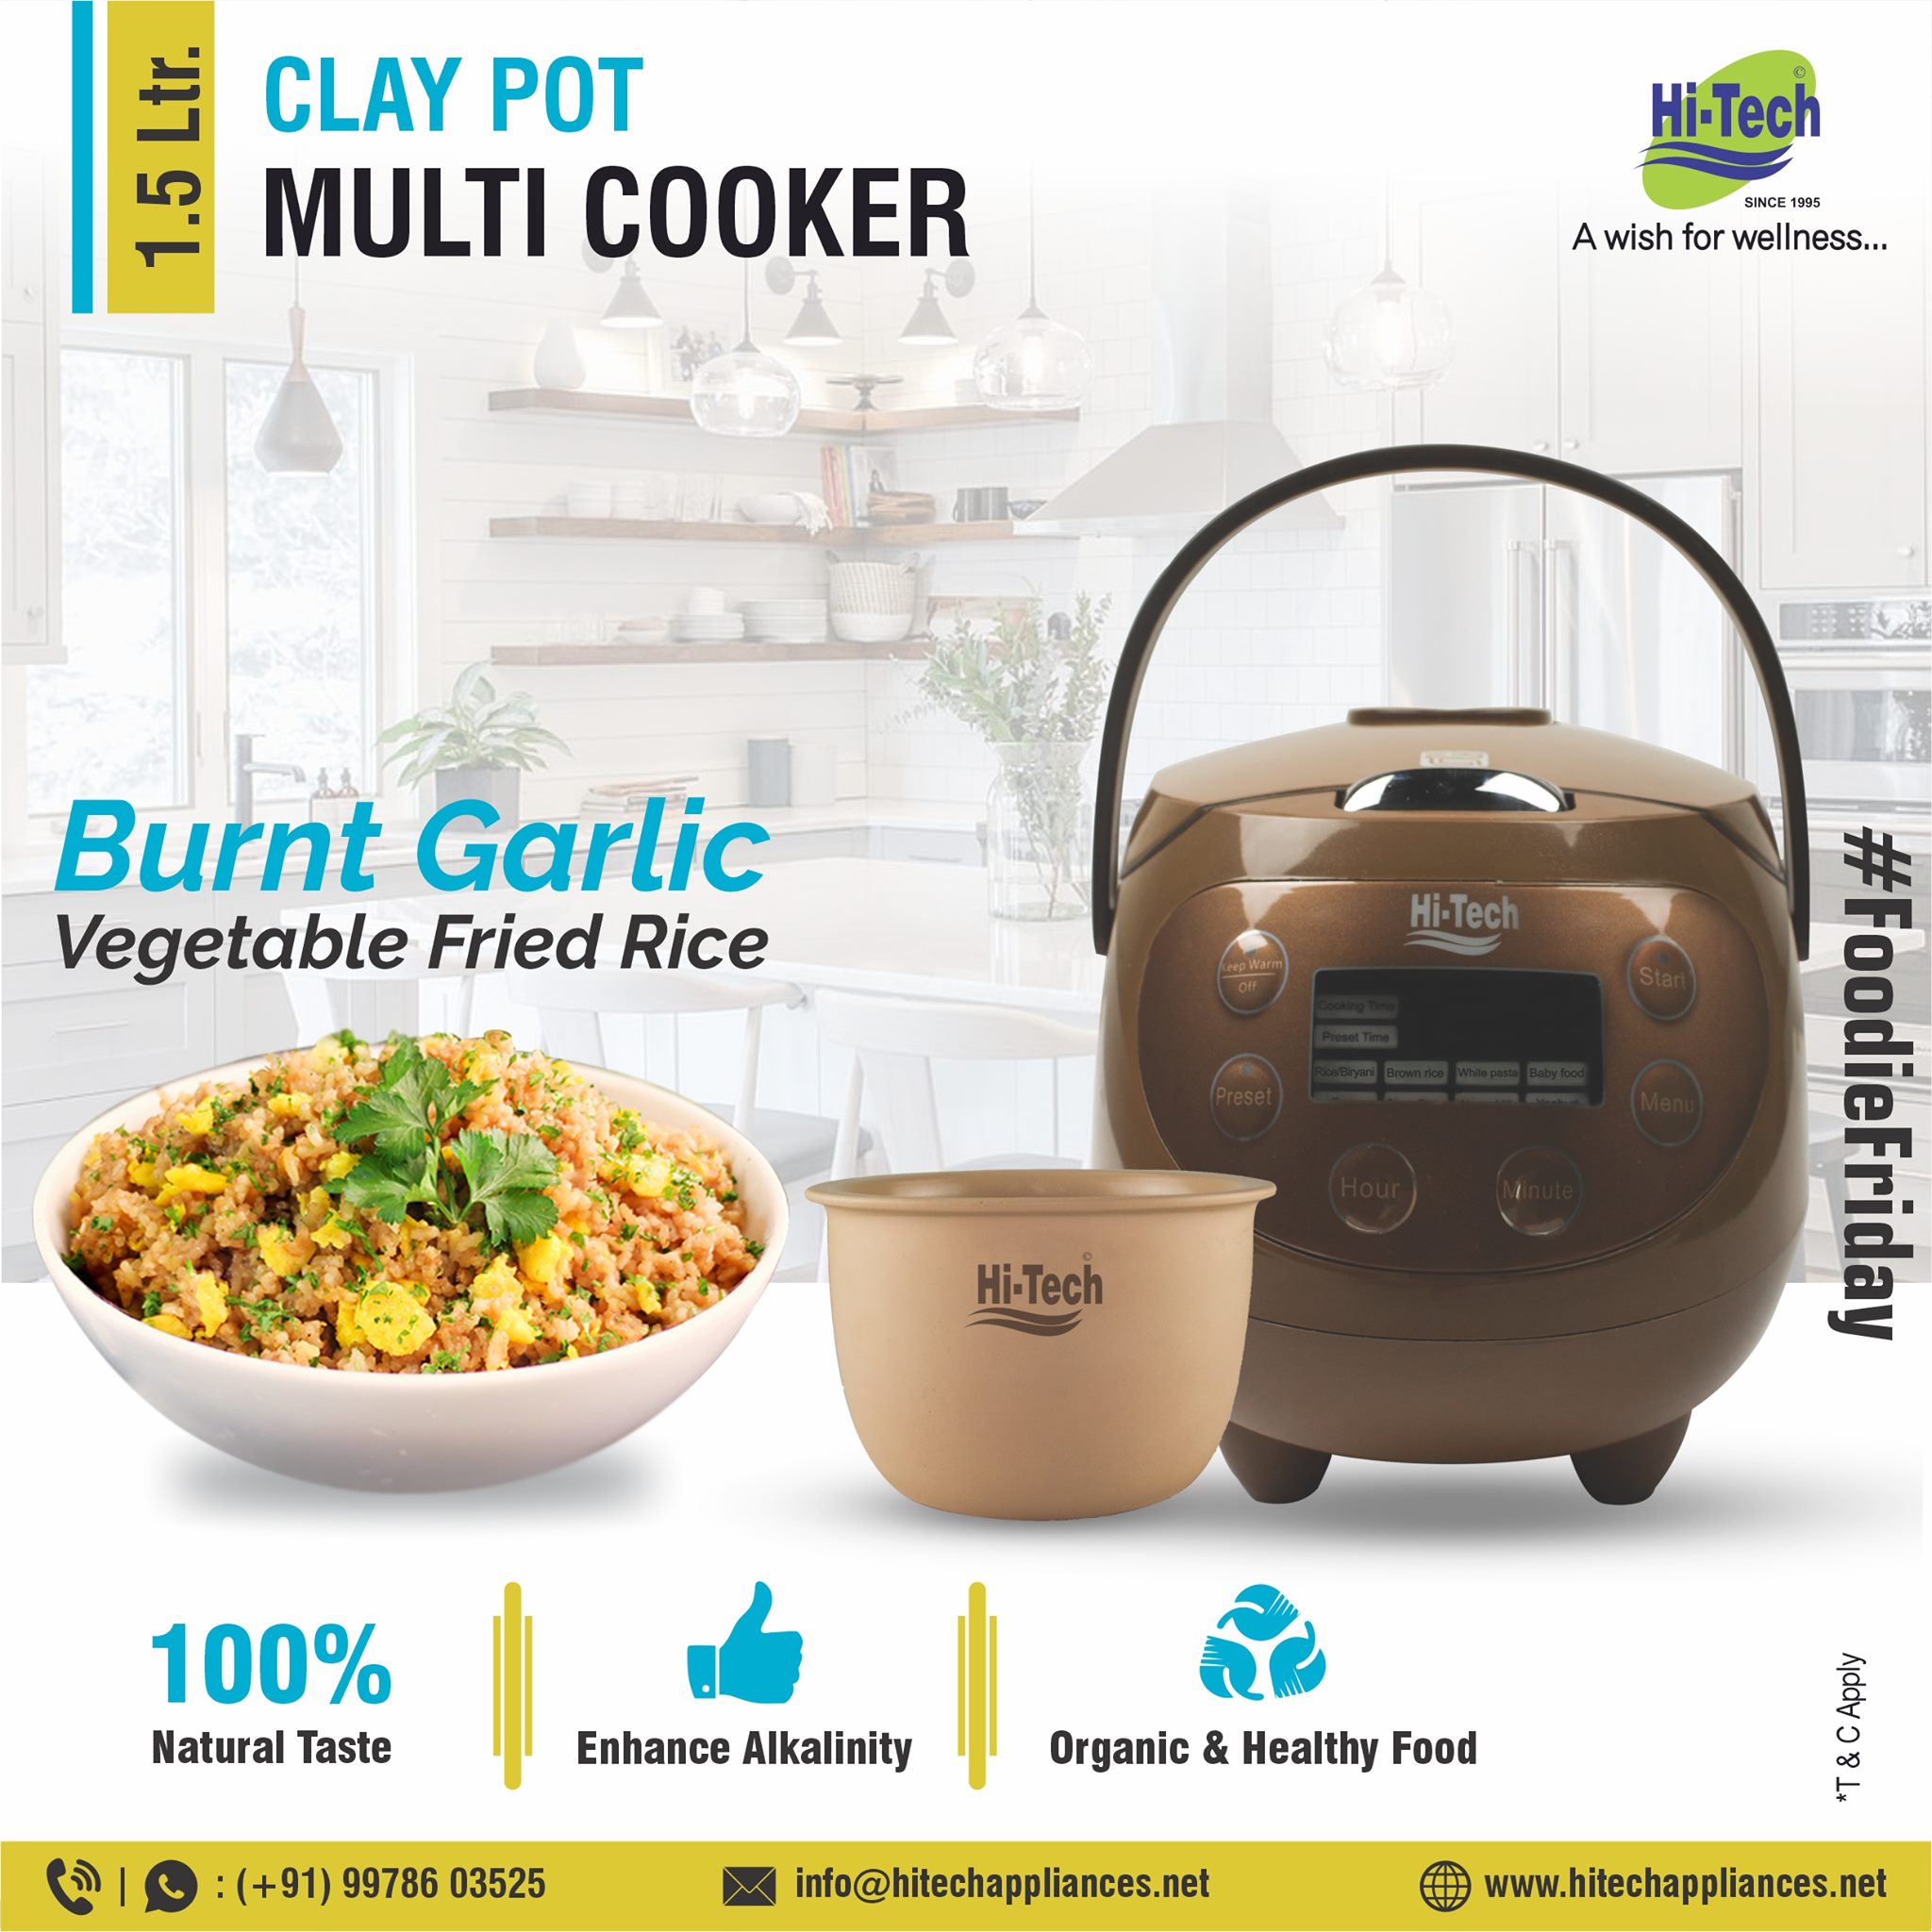 How to make Burnt Garlic Vegetable Fried Rice with Hi-Tech Clay Pot Cooker